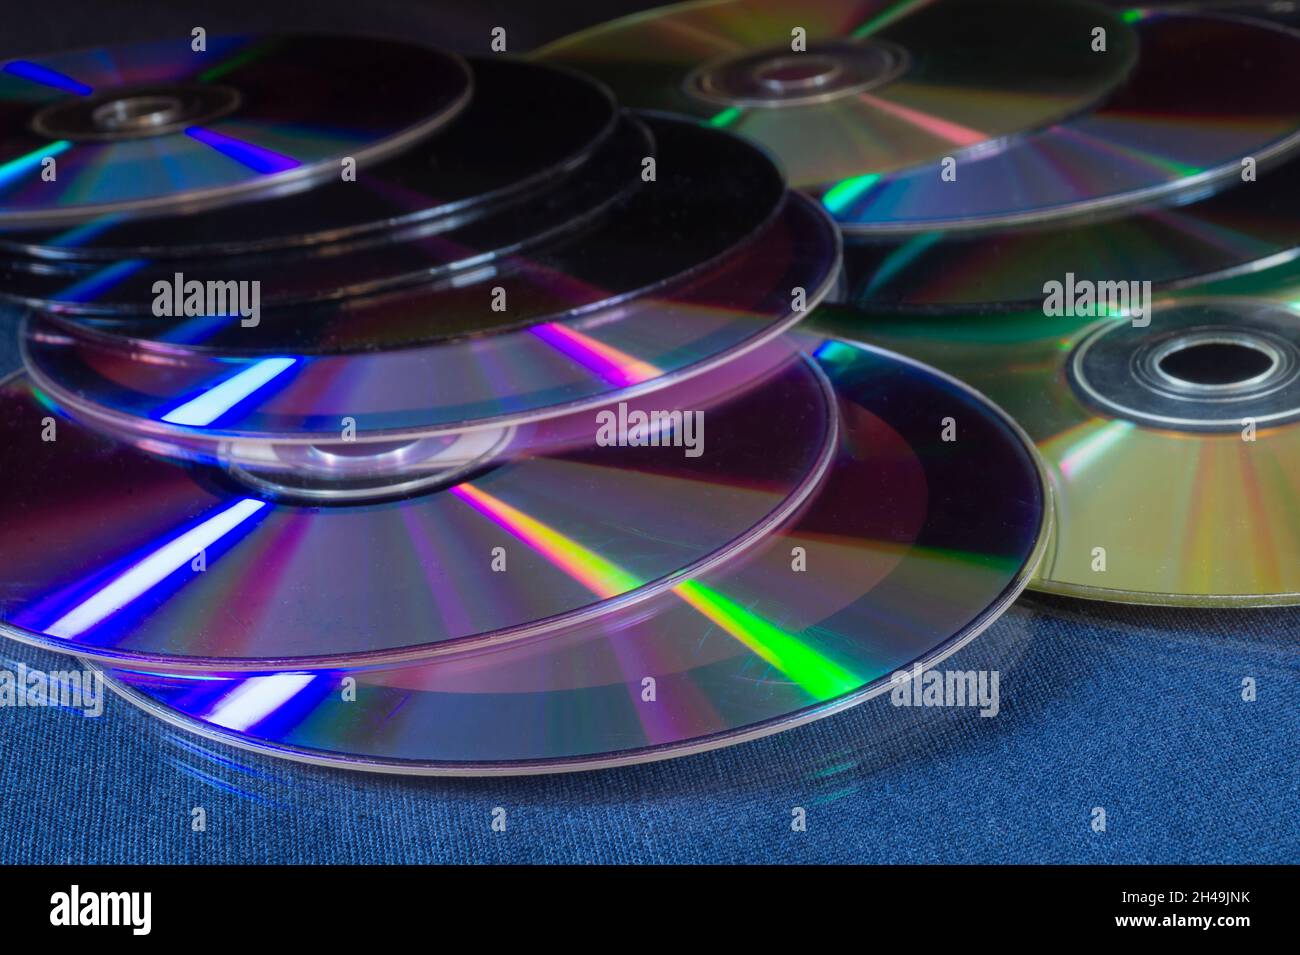 A stack of DVDs on a table with a reflection. Objects on a black background Stock Photo